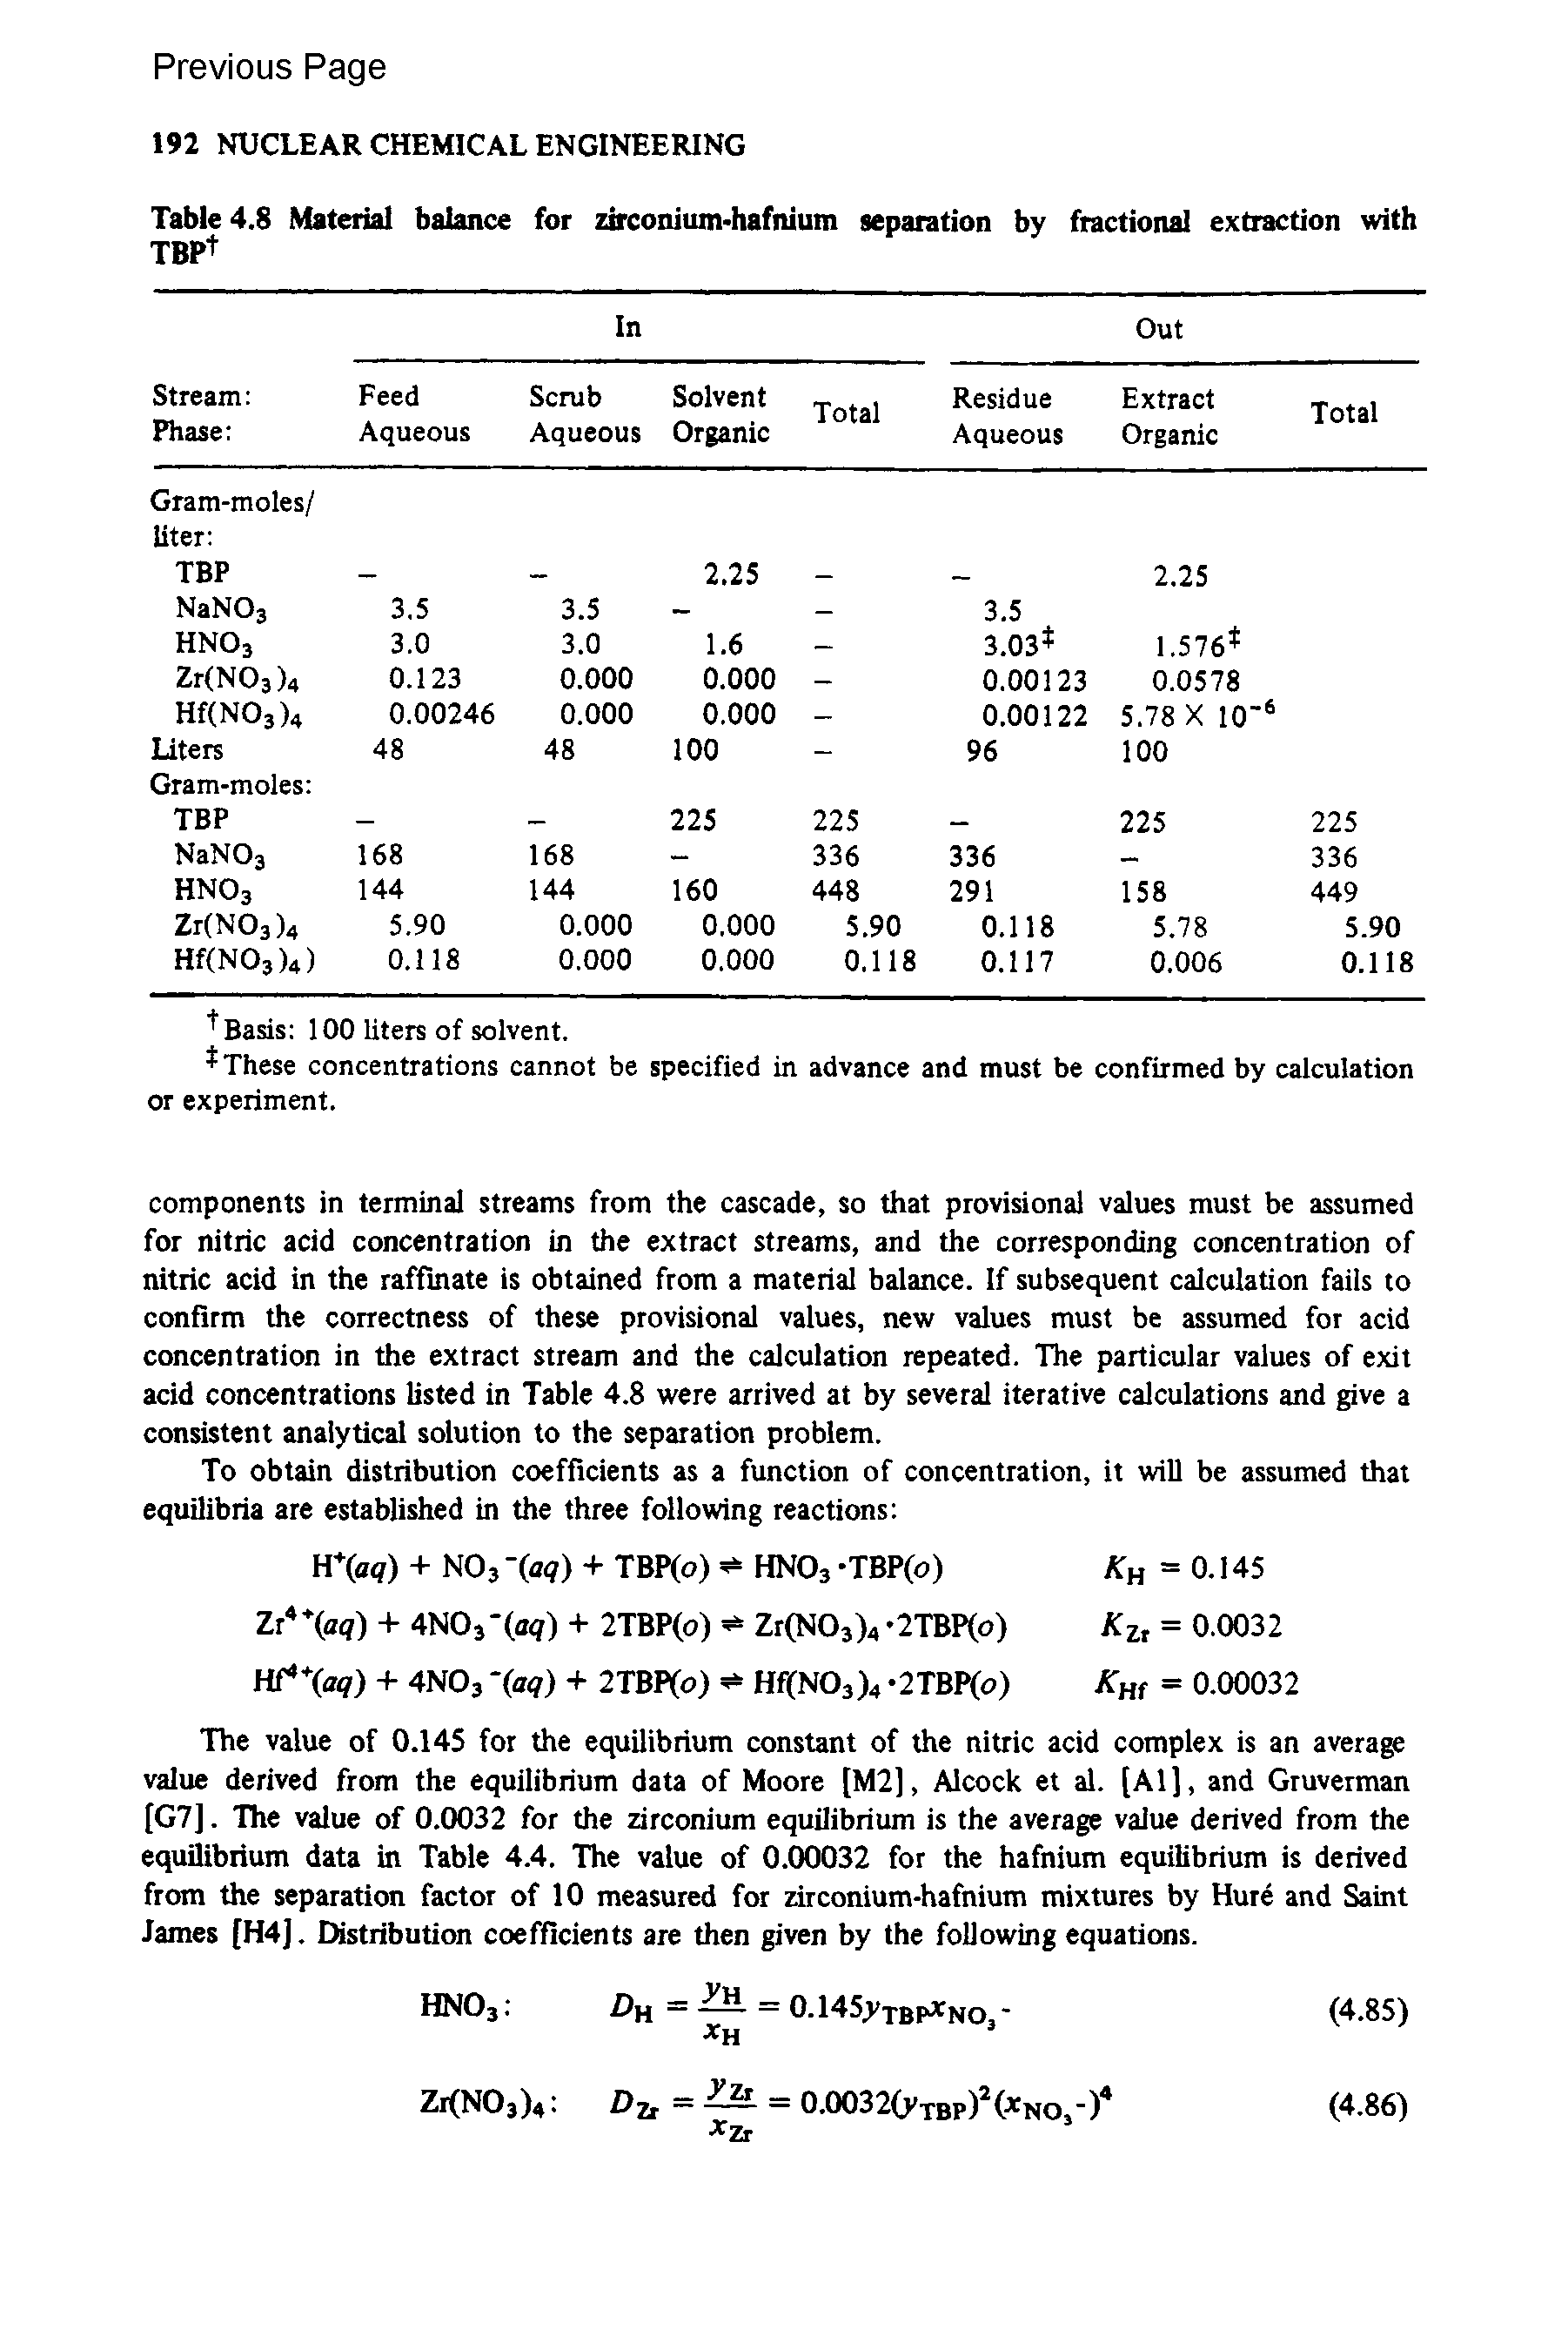 Table 4.8 Material balance for zirconium-hafnium separation by fractional extraction with TBP+...